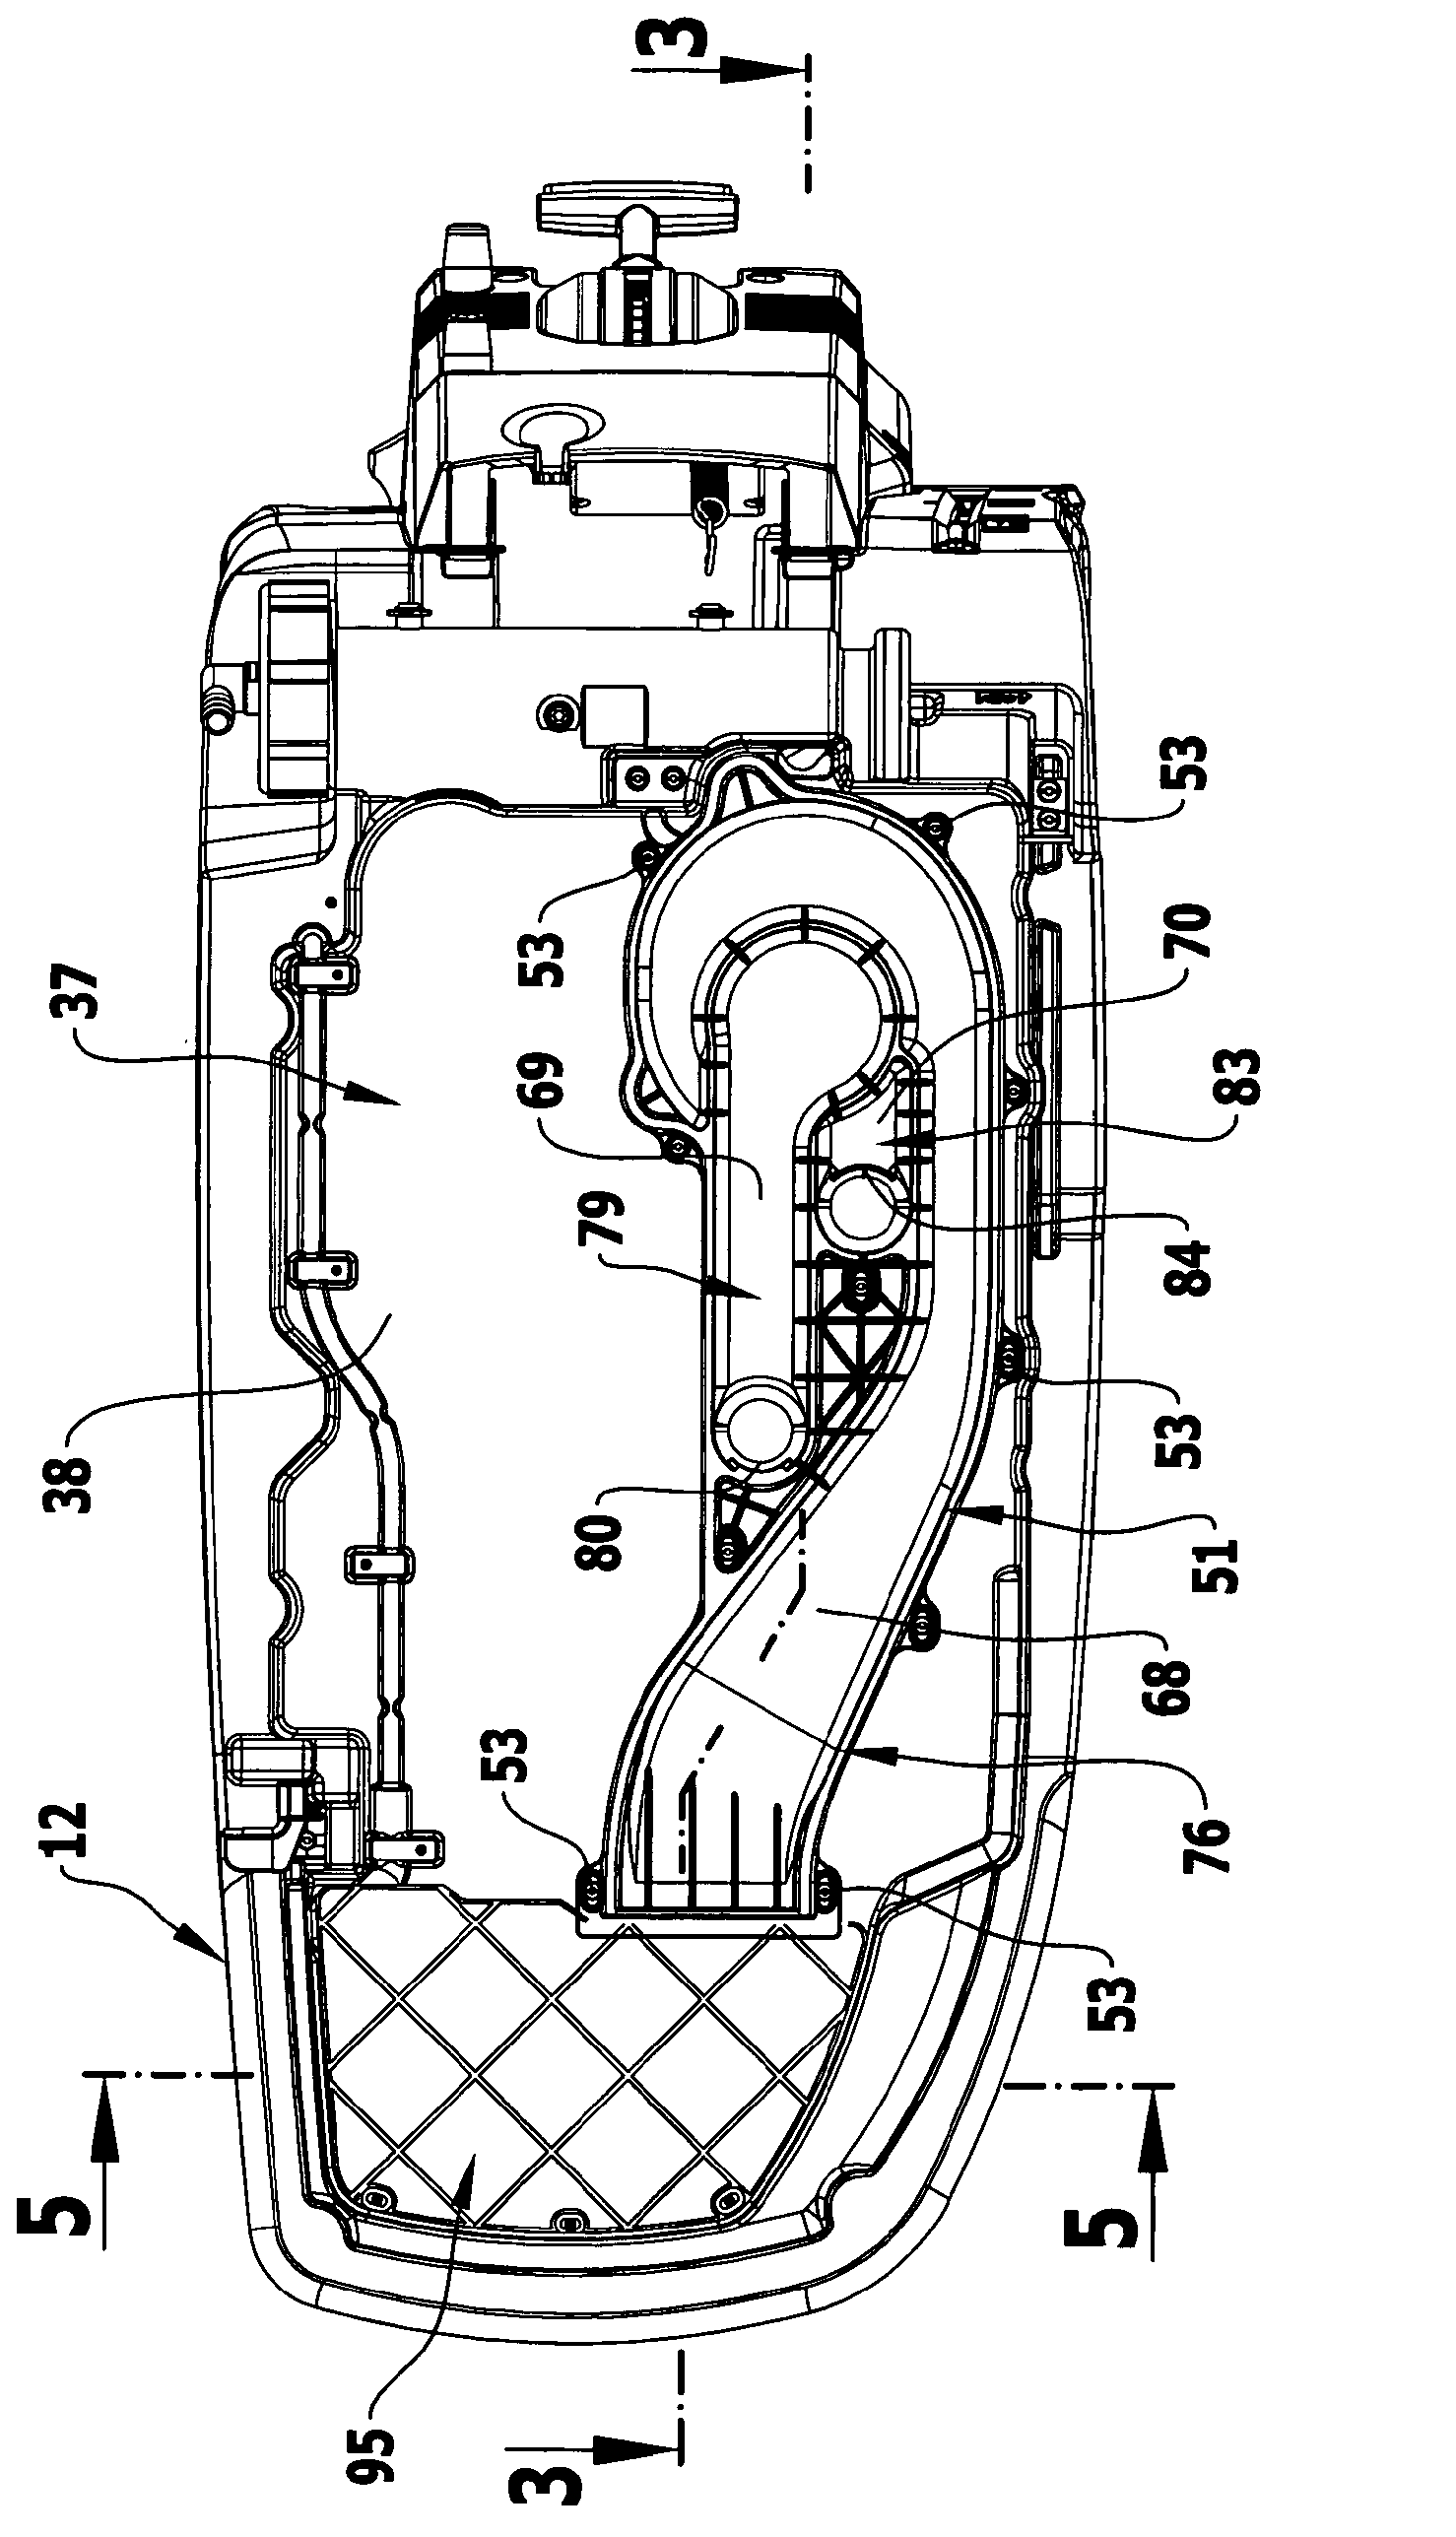 Mobile floor cleaning device having noise insulation